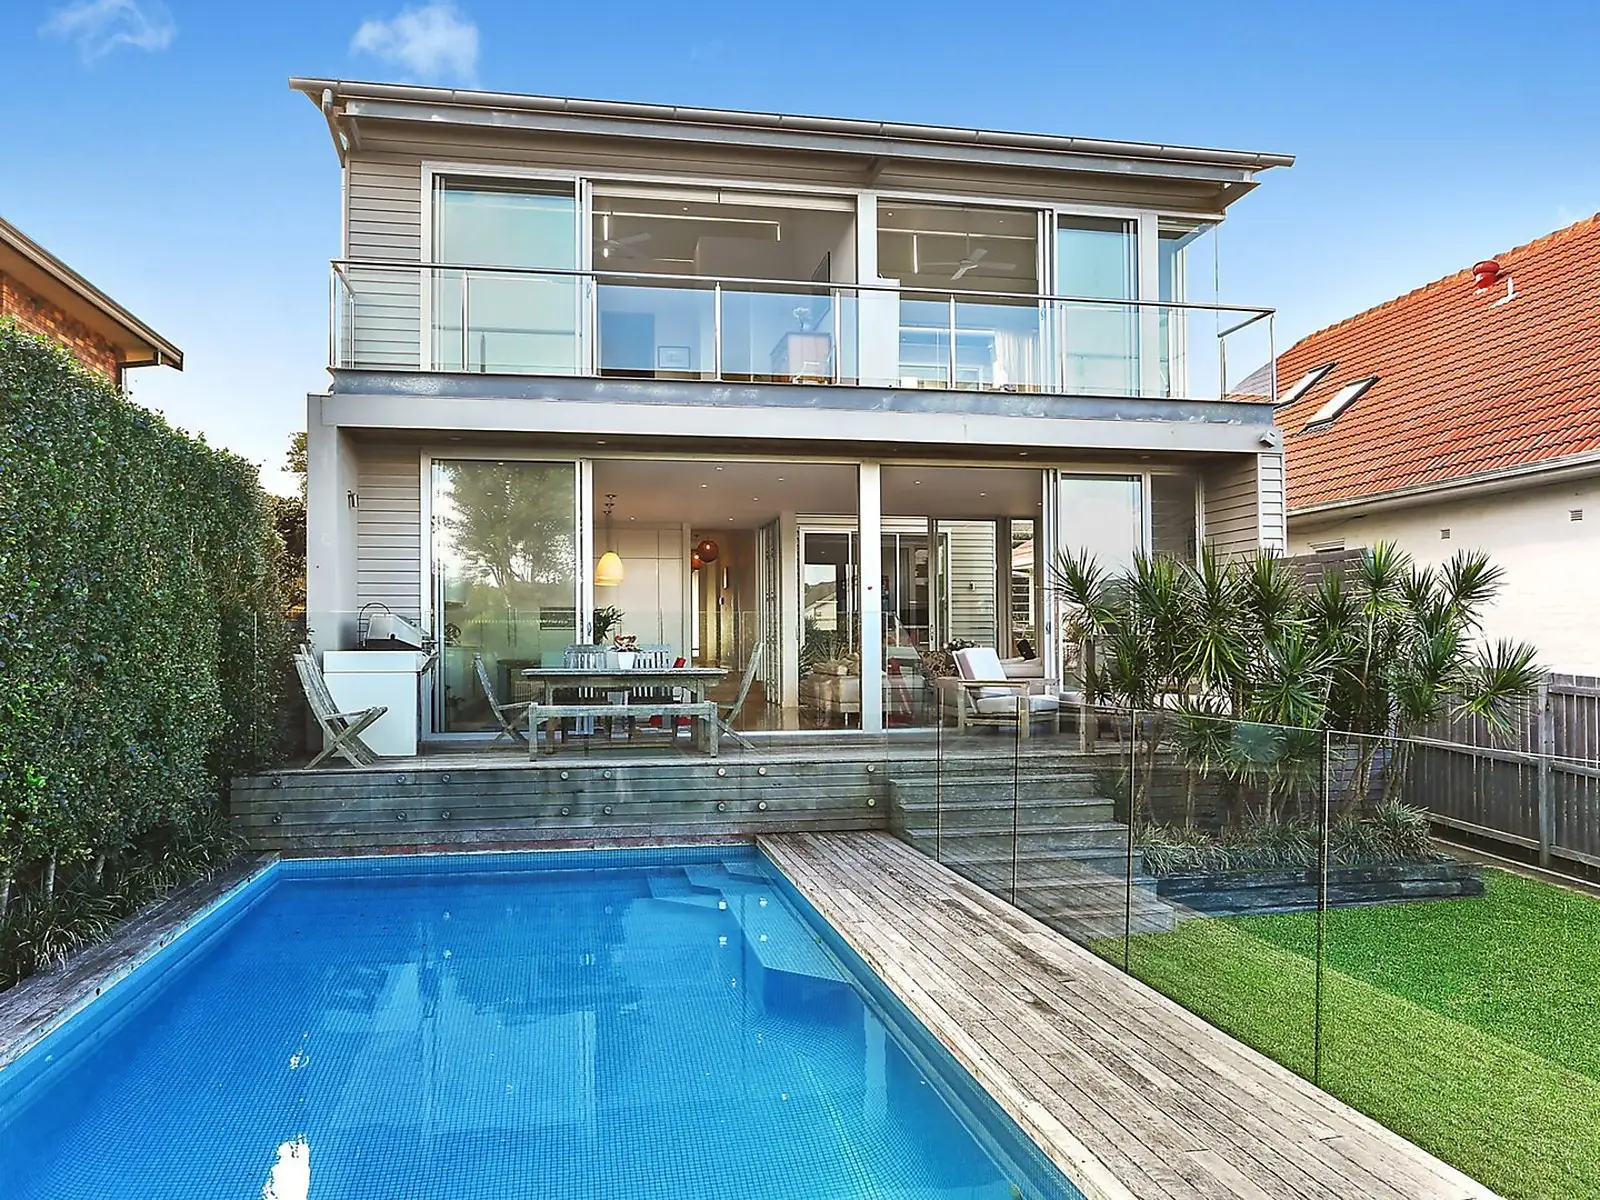 Photo #1: 24 Battery Street, Coogee - Sold by Sydney Sotheby's International Realty